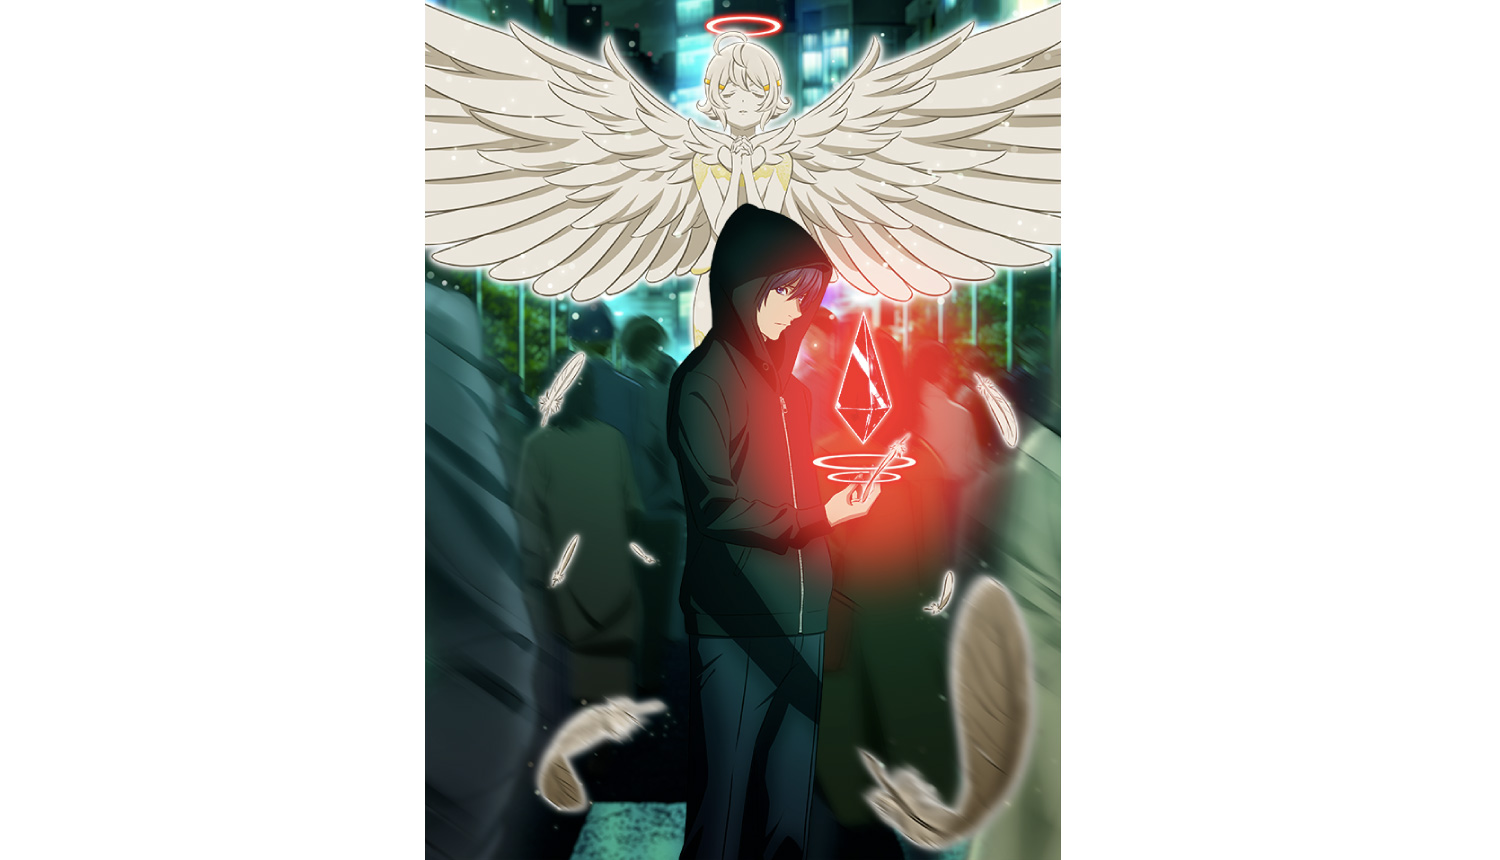 Why Platinum End's Angels Are More Attractive Than Death Note's Shinigami